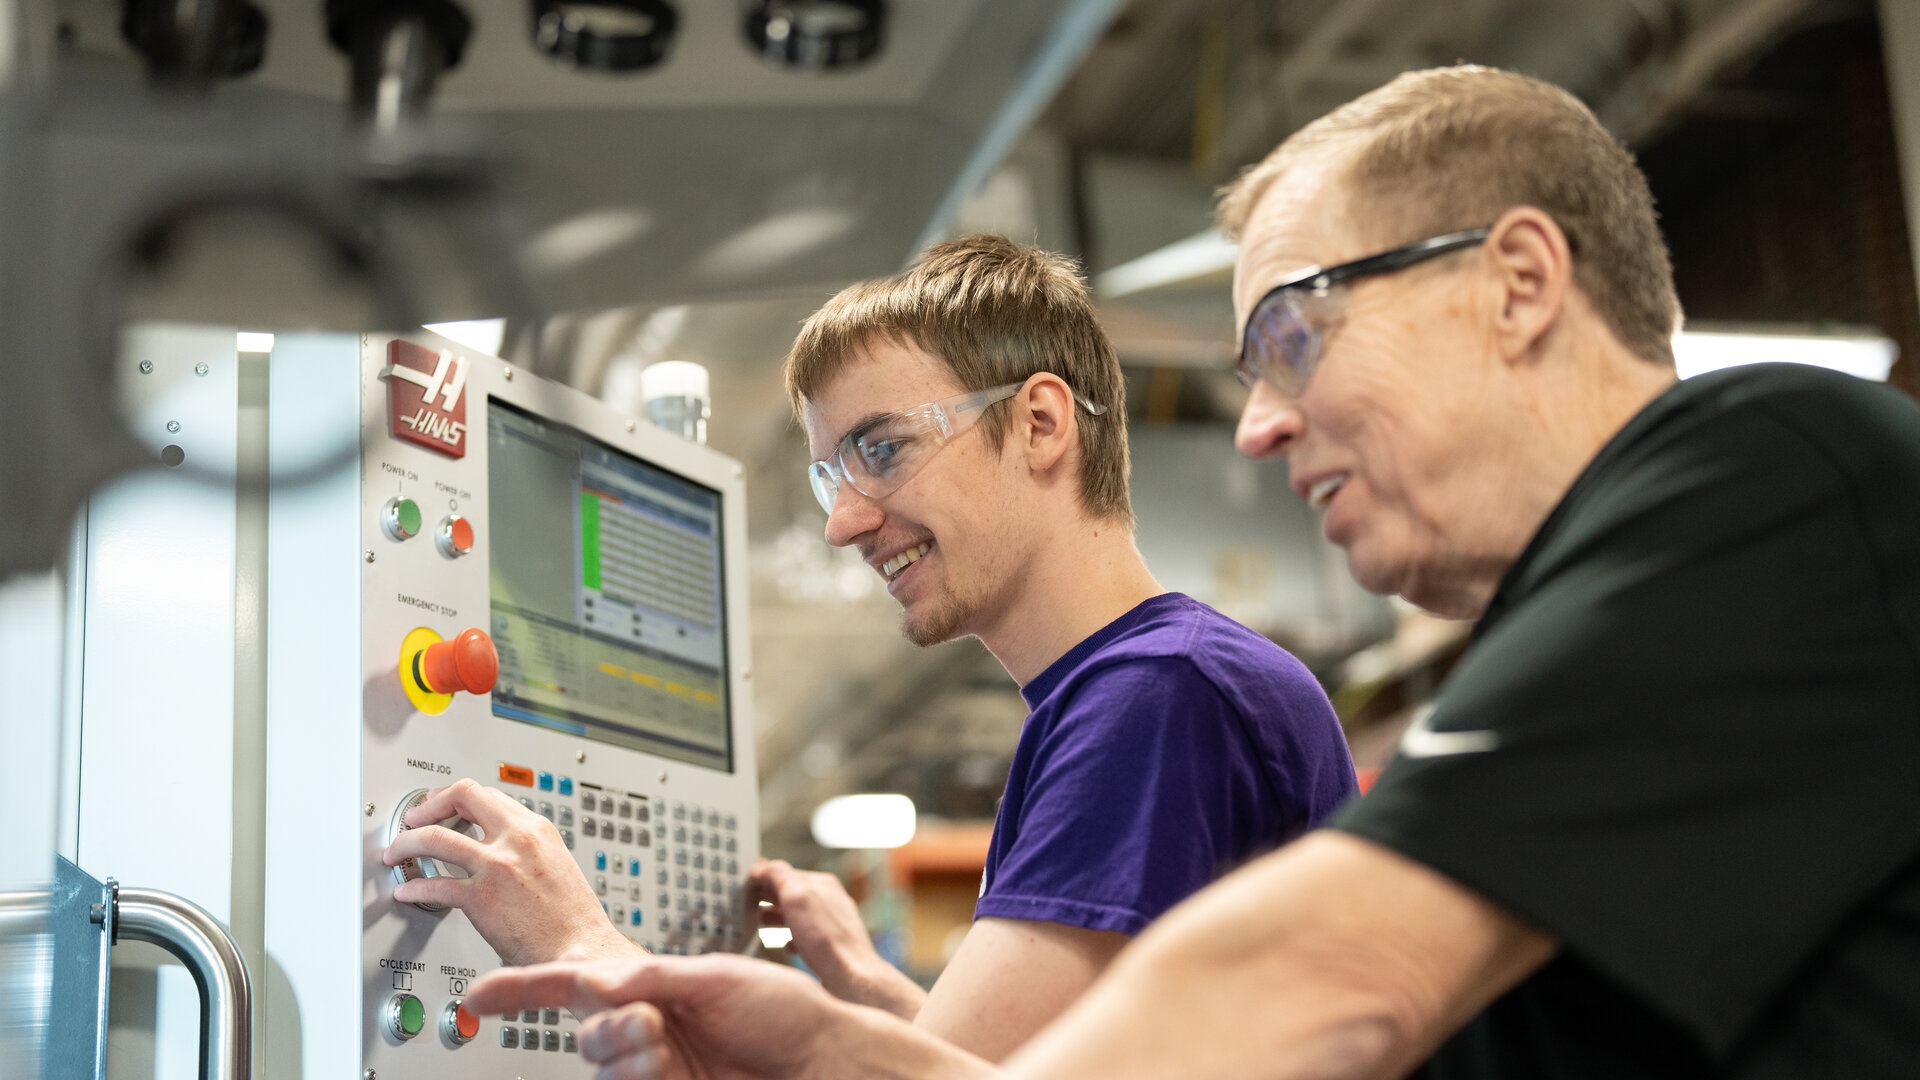 Engineering student makes adjustments on a CNC control pad while faculty assists him.